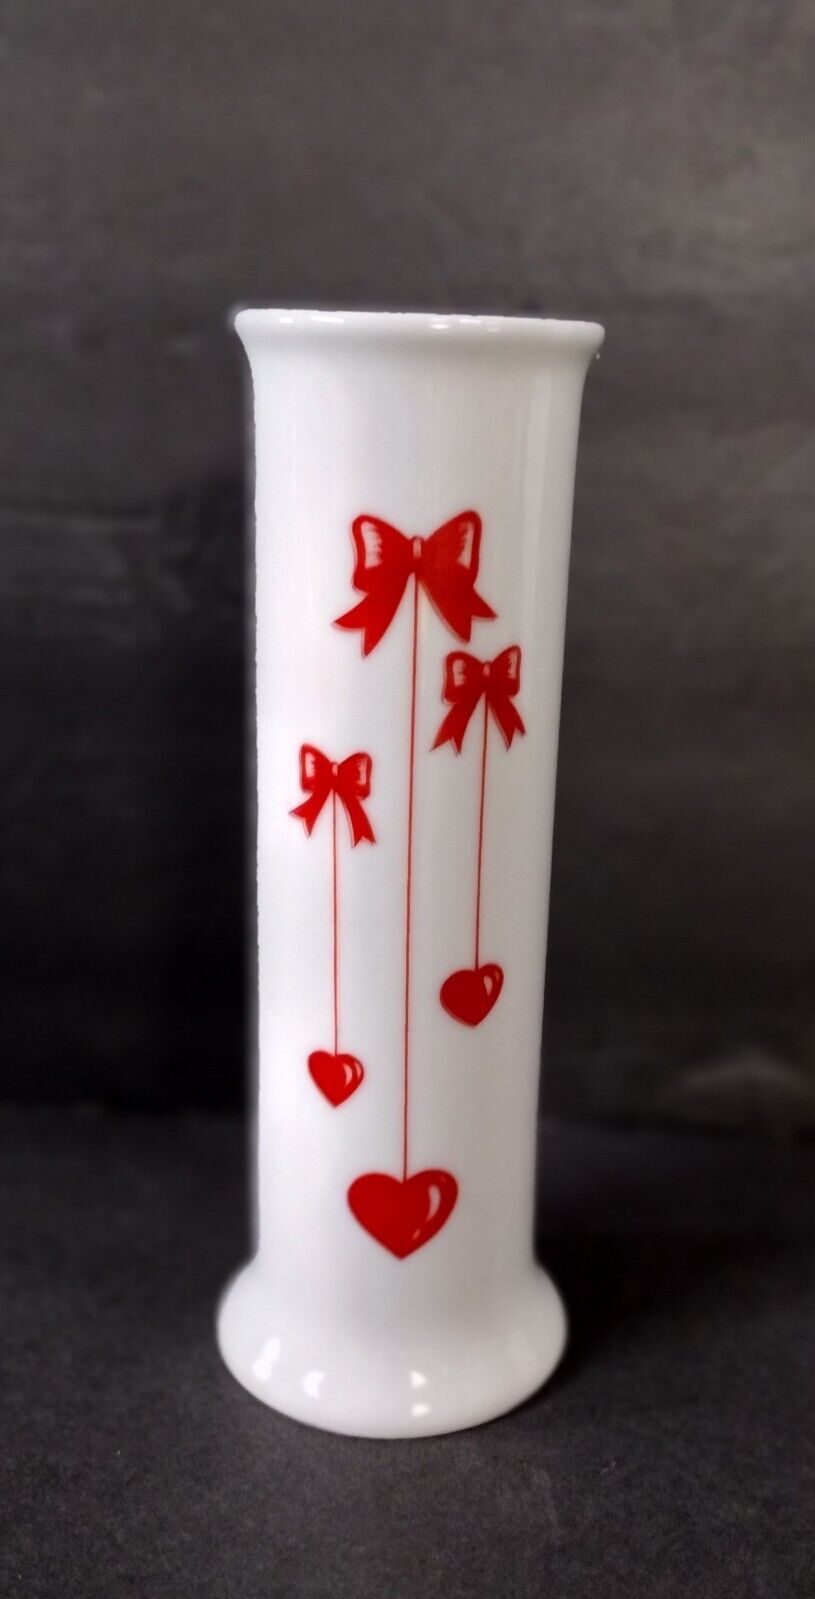 FTDA White Ceramic Vase With Red Bows & Hearts 6-7/8